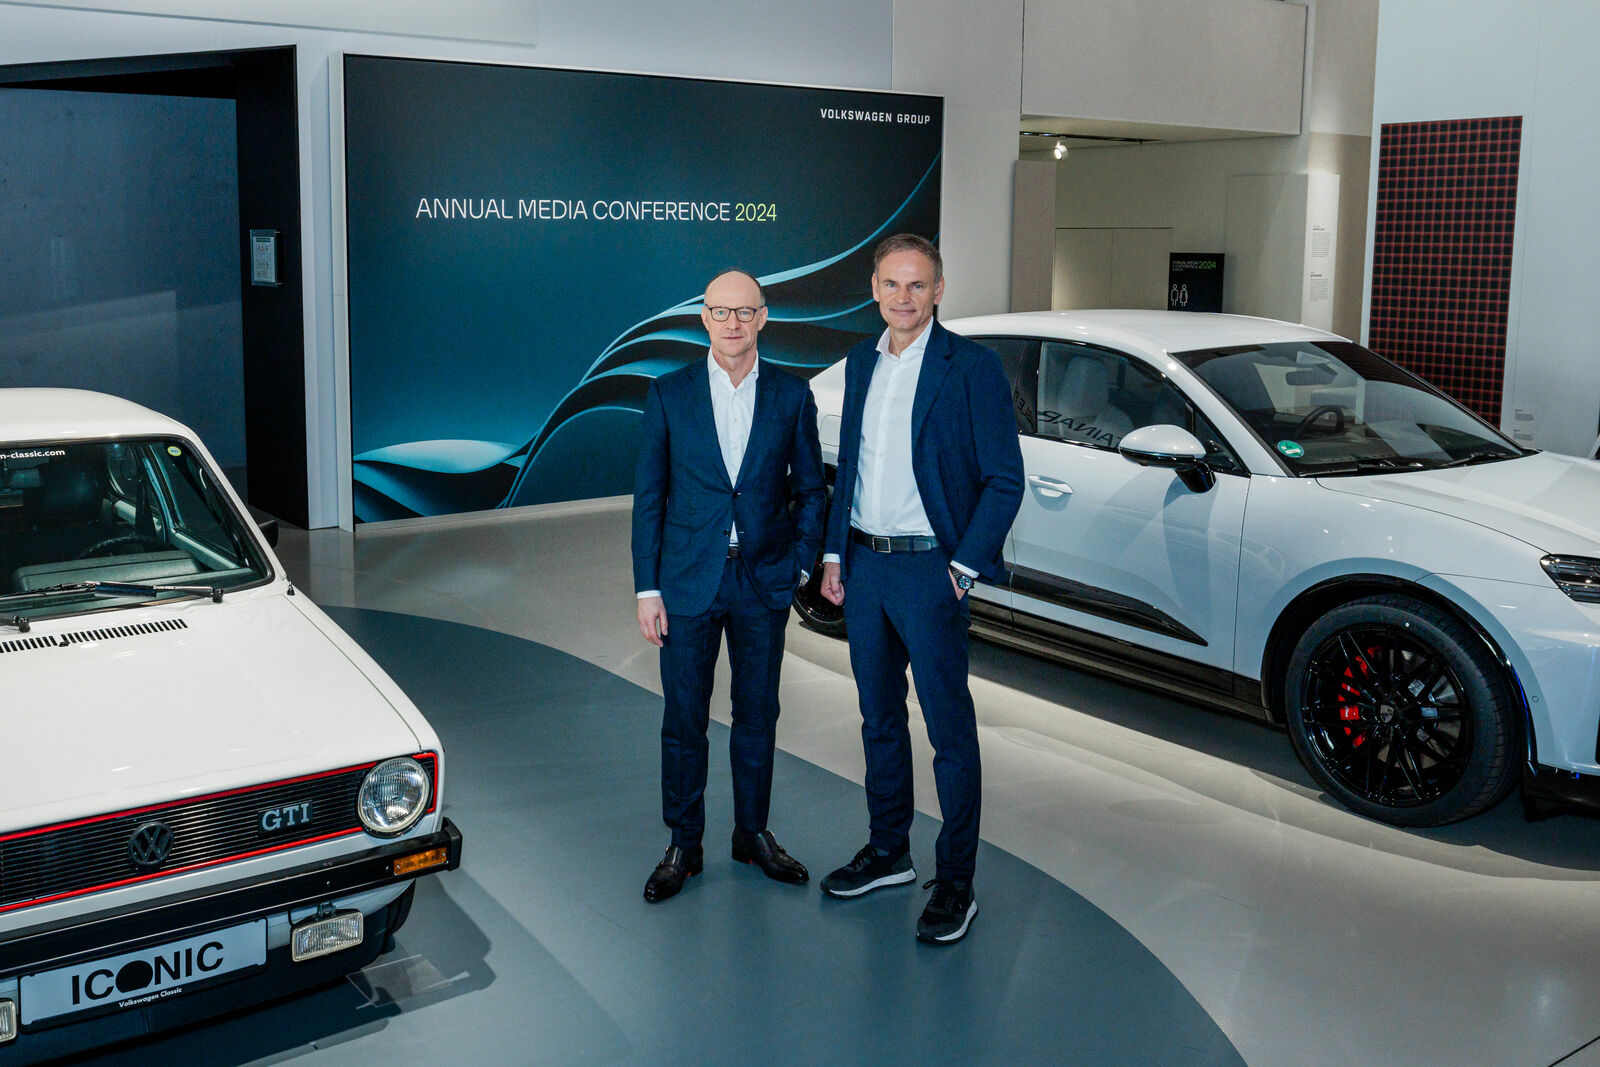 Two men in business attire standing next to a classic and a modern Volkswagen car at a press conference.